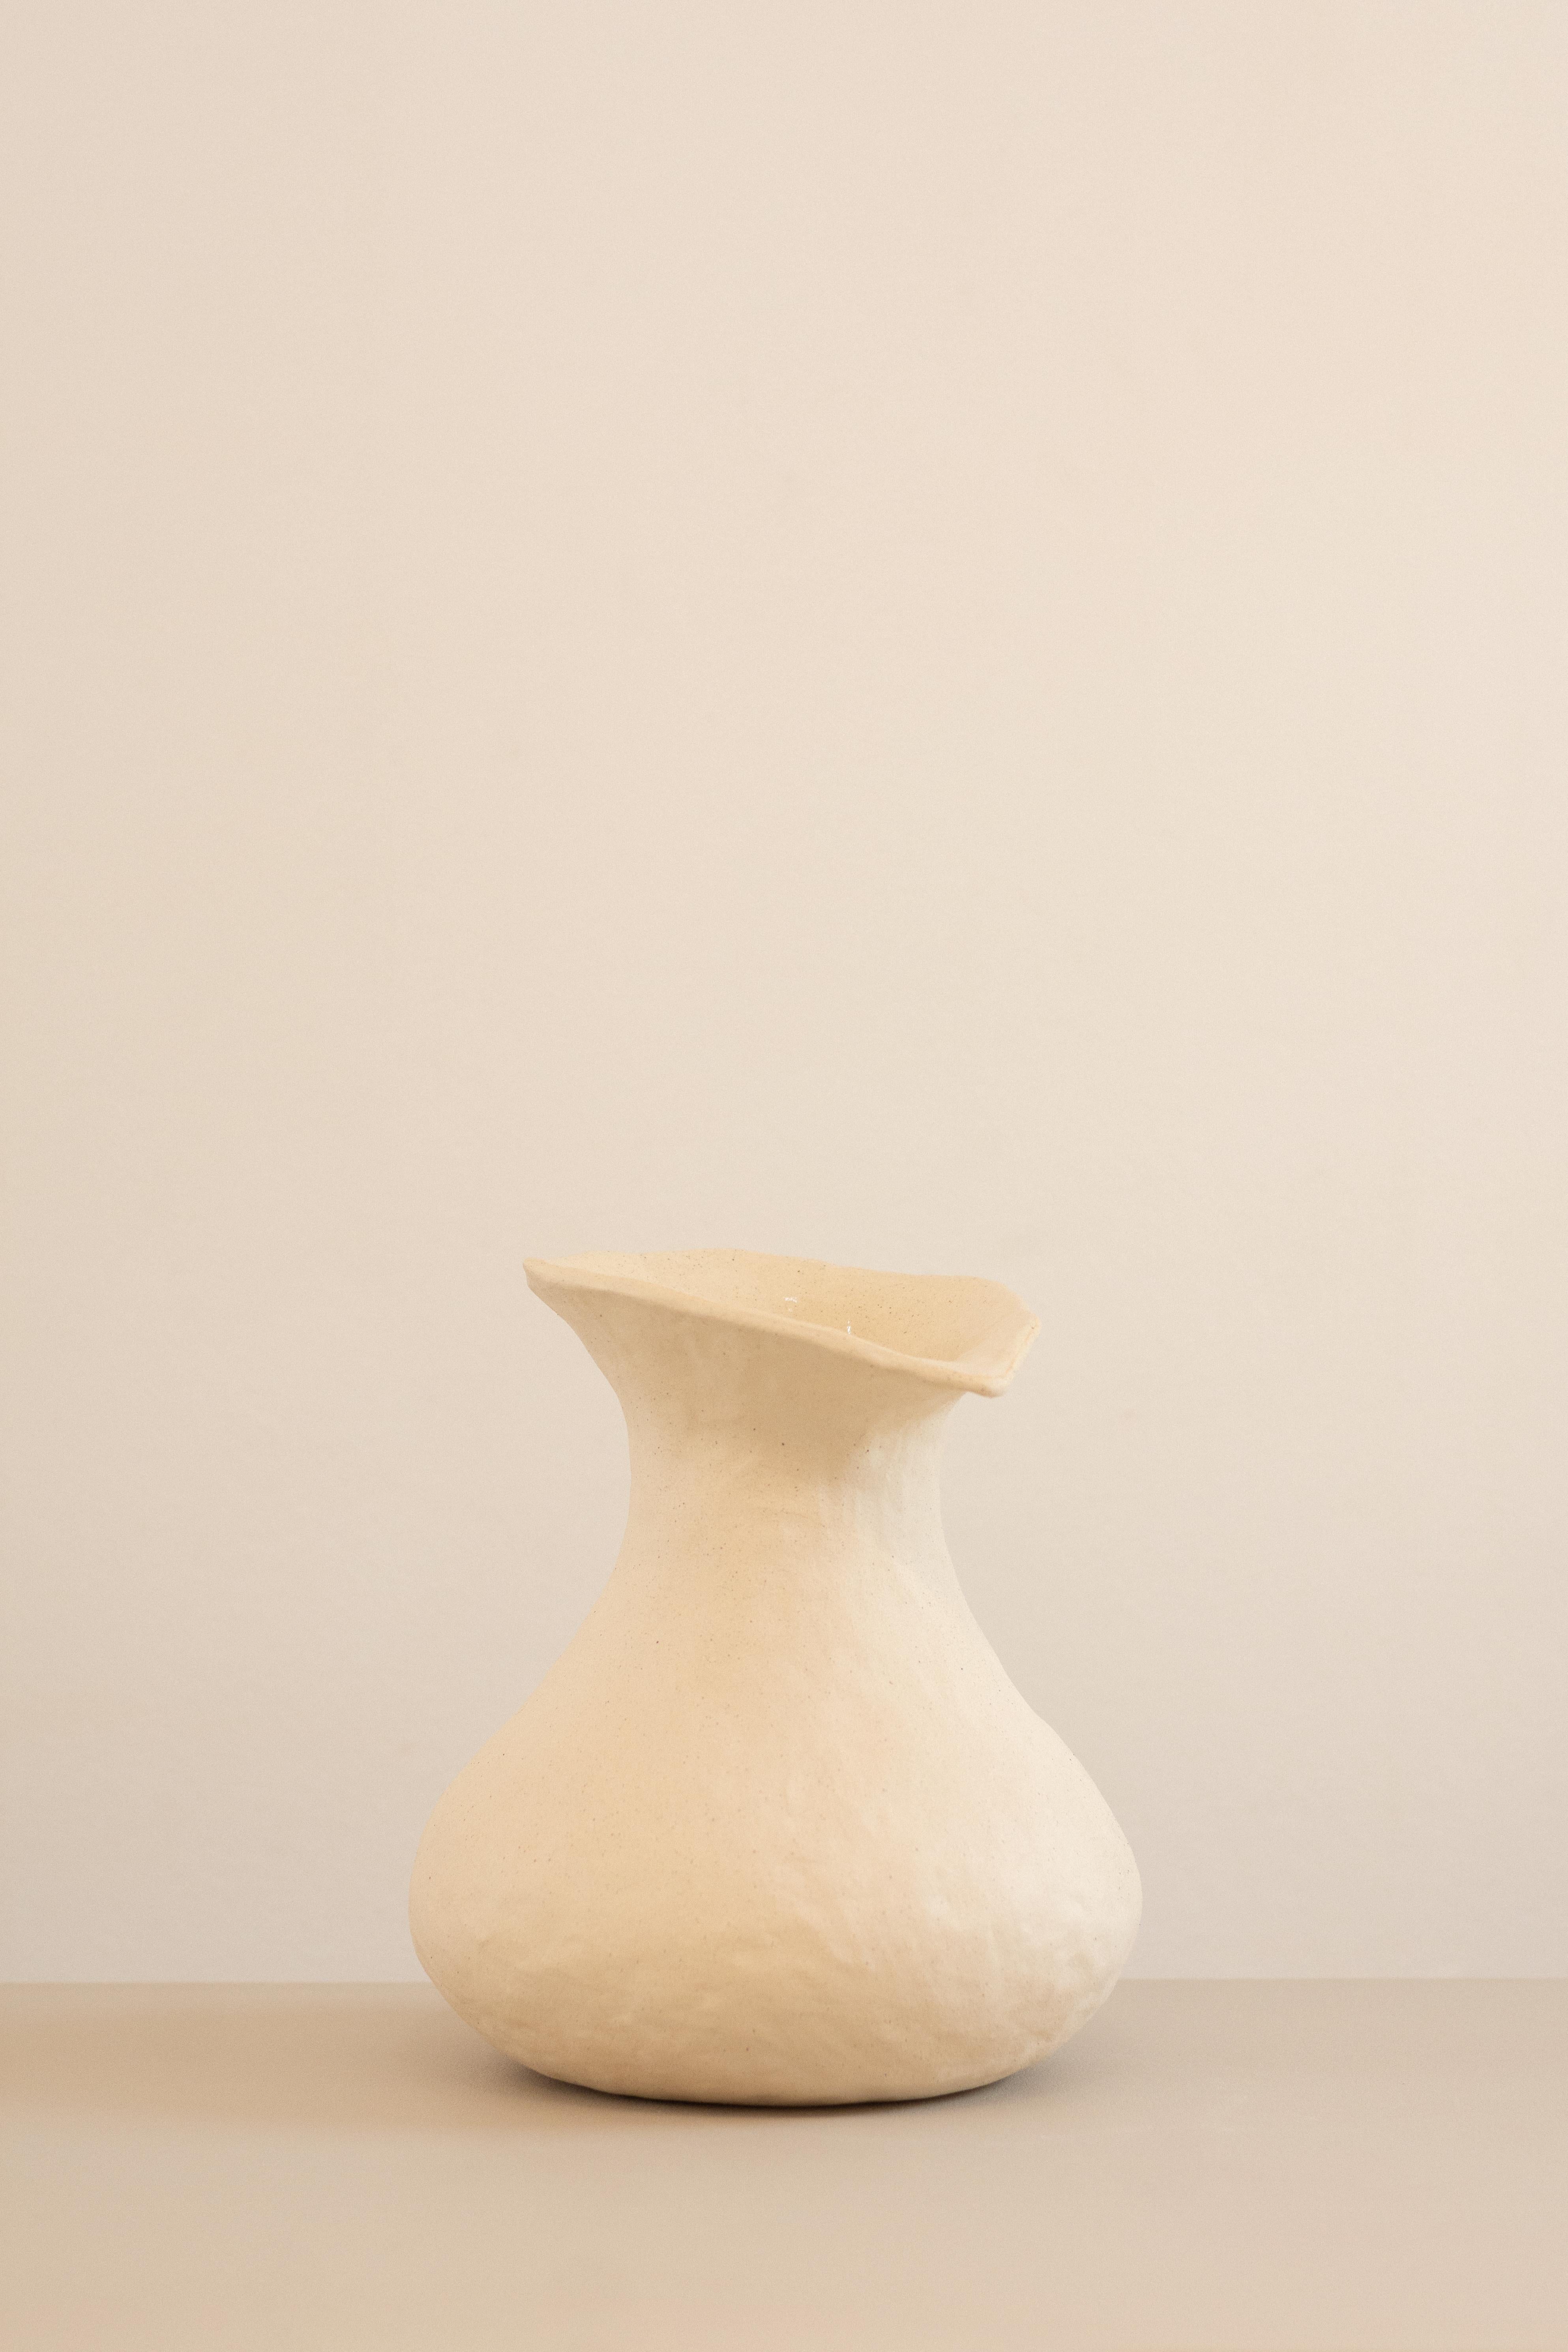 This vase is part of the Rupa series, a collection of pieces developed without the use of molds. Each piece expresses the contours and textures imprinted by the hands of the artist, resulting in creations with intriguing and  complexity visual, that